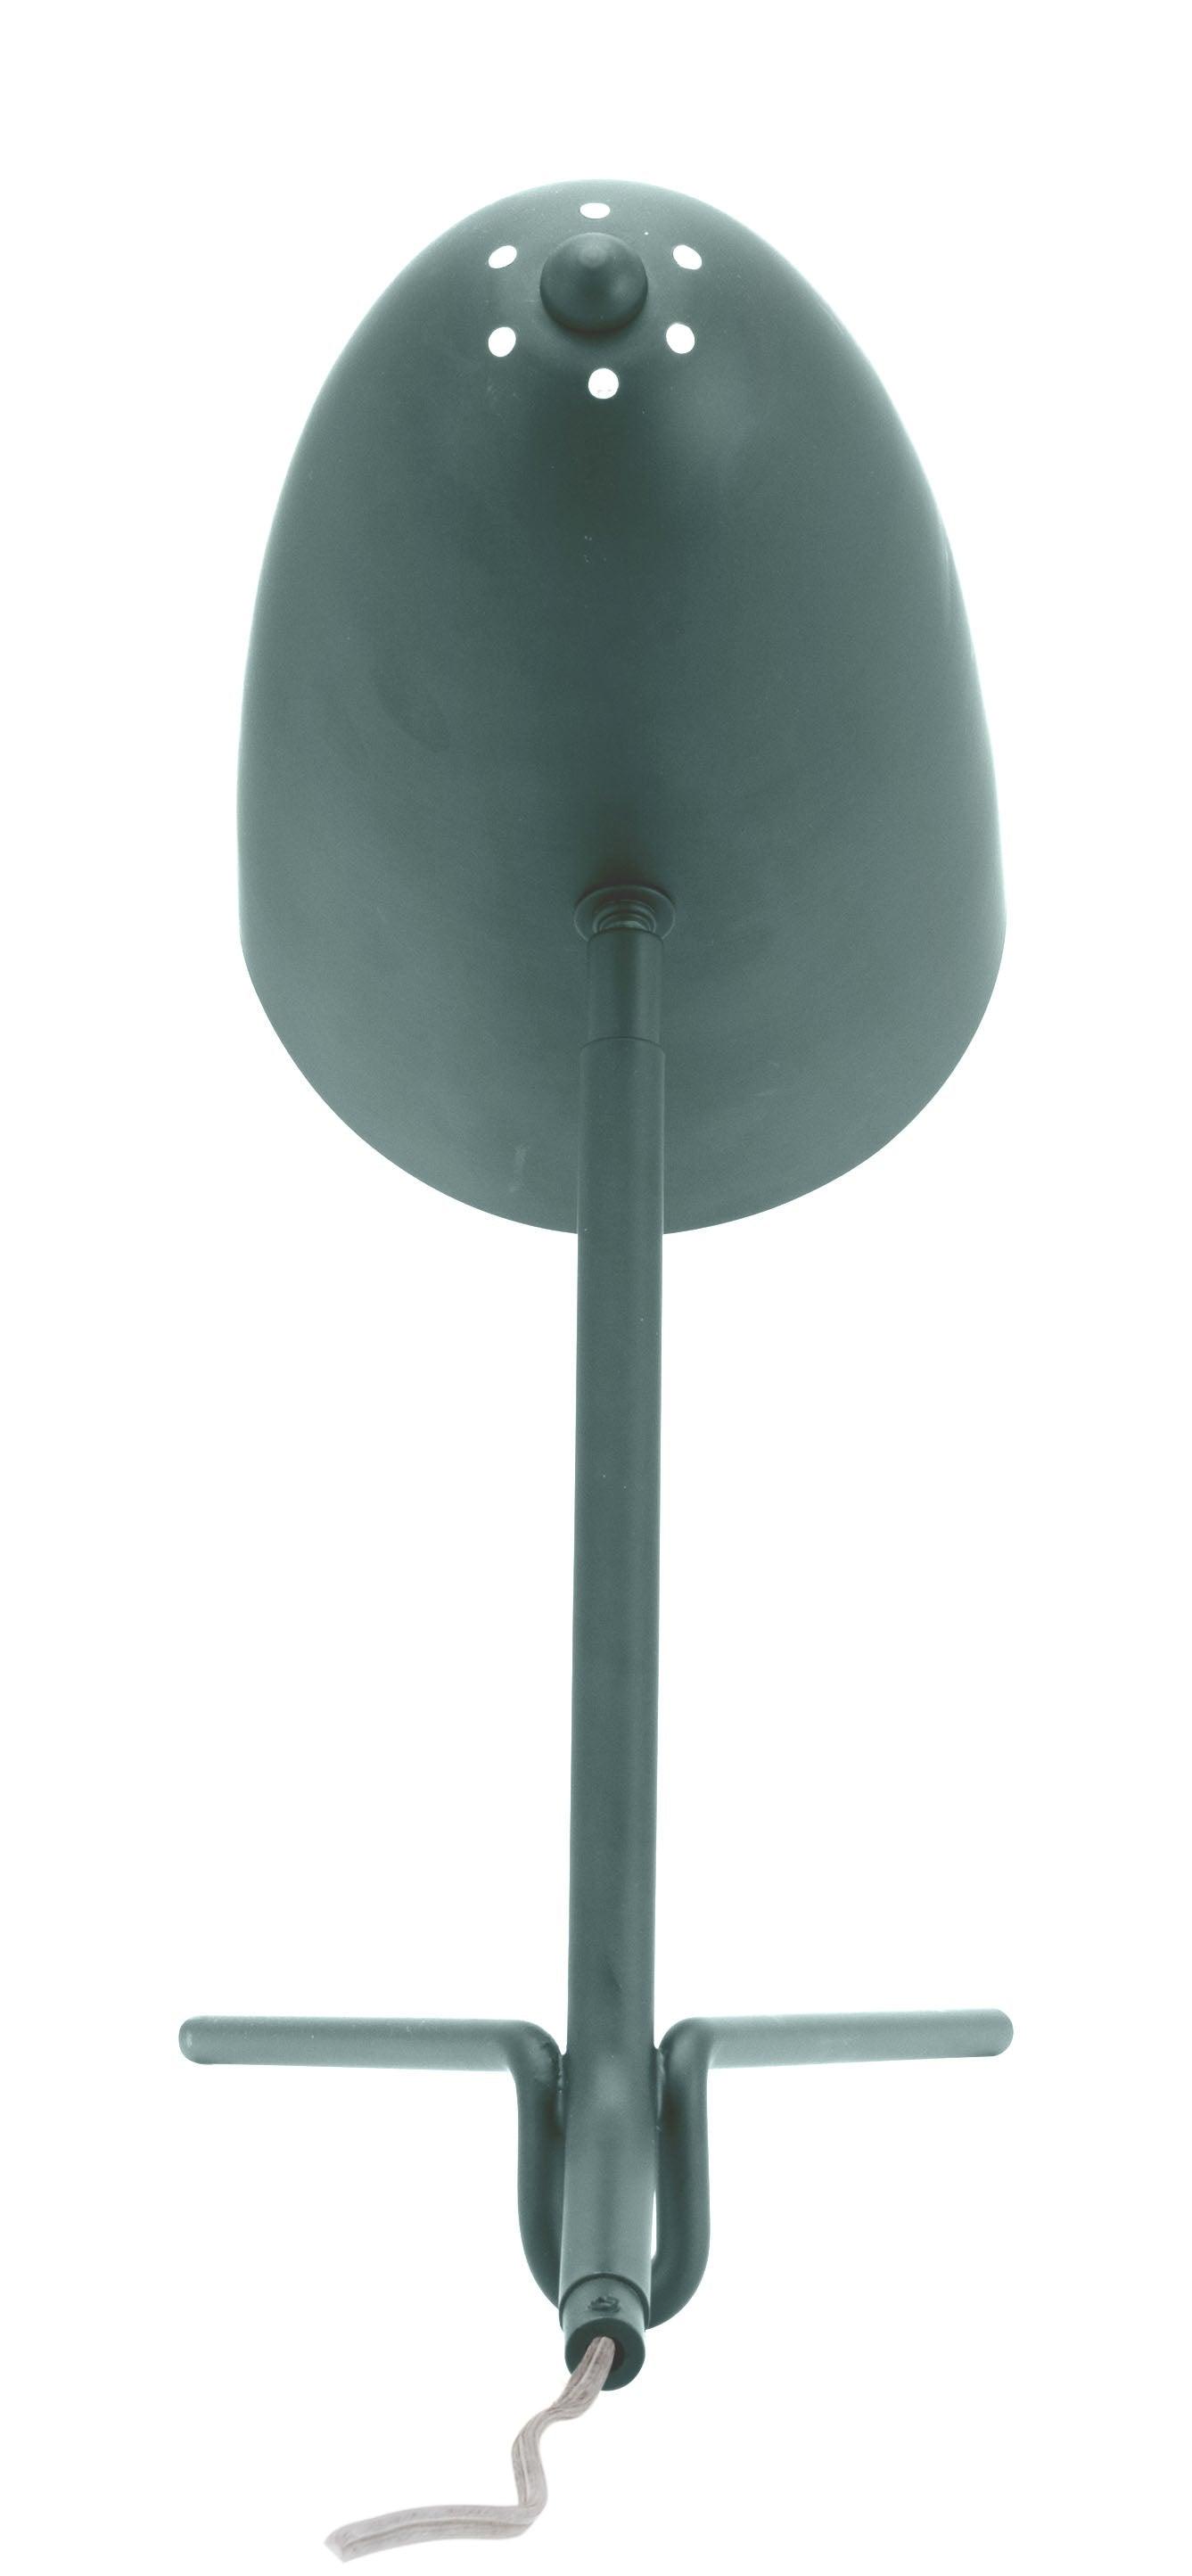 Jamison Table Lamp Matte Green - Sideboards and Things Brand_Zuo Modern, Color_Green, Depth_0-10, Features_Swivel, Finish_Powder Coated, Height_10-20, Materials_Metal, Metal Type_Steel, Product Type_Table Lamp, Width_10-20